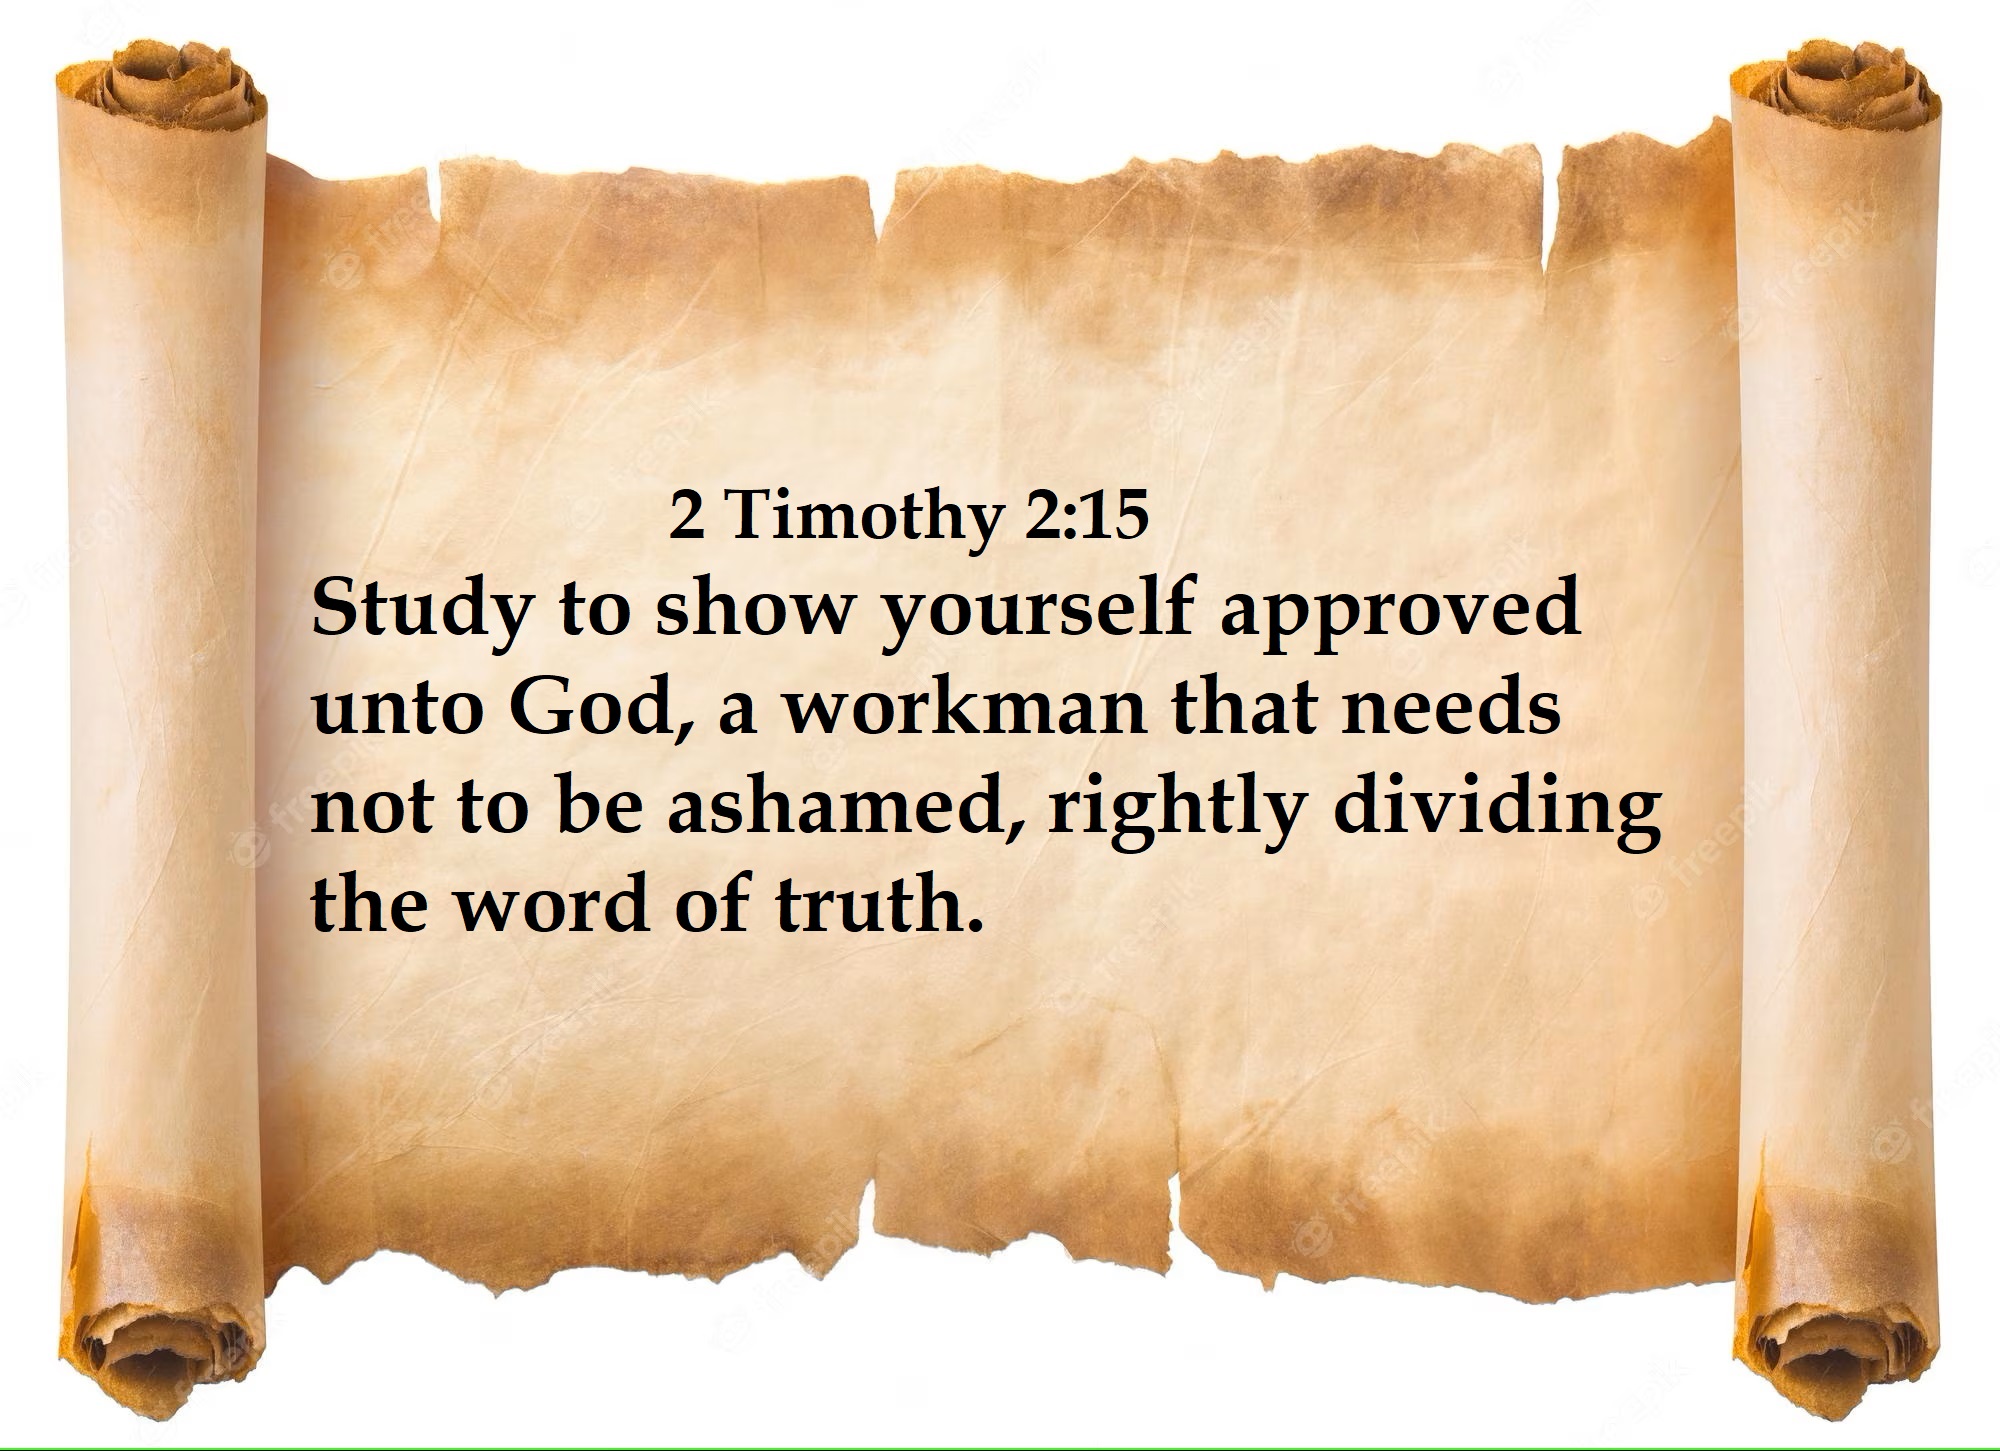 Study to show yourself approved unto God, a workman that needs not to be ashamed, rightly dividing the word of truth.